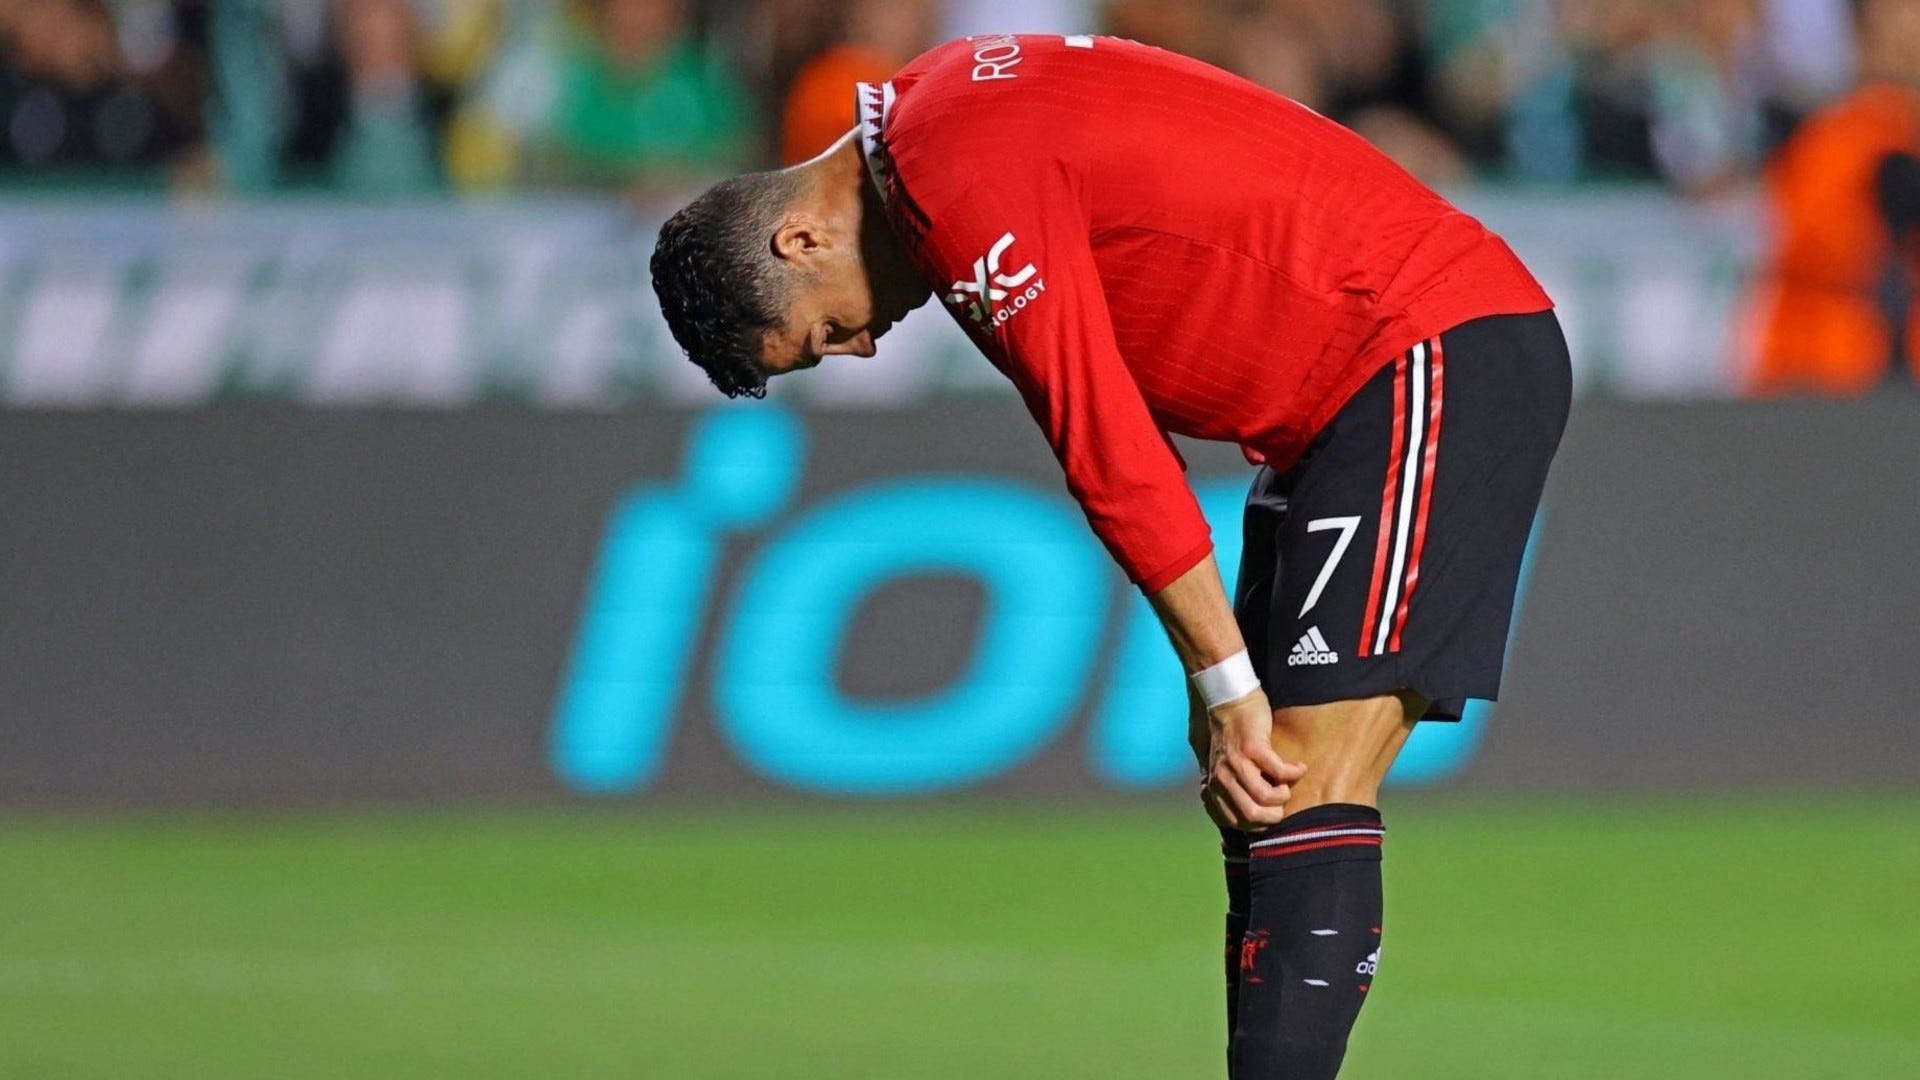 'Ronaldo is finished' - Manchester United star mocked by fans after